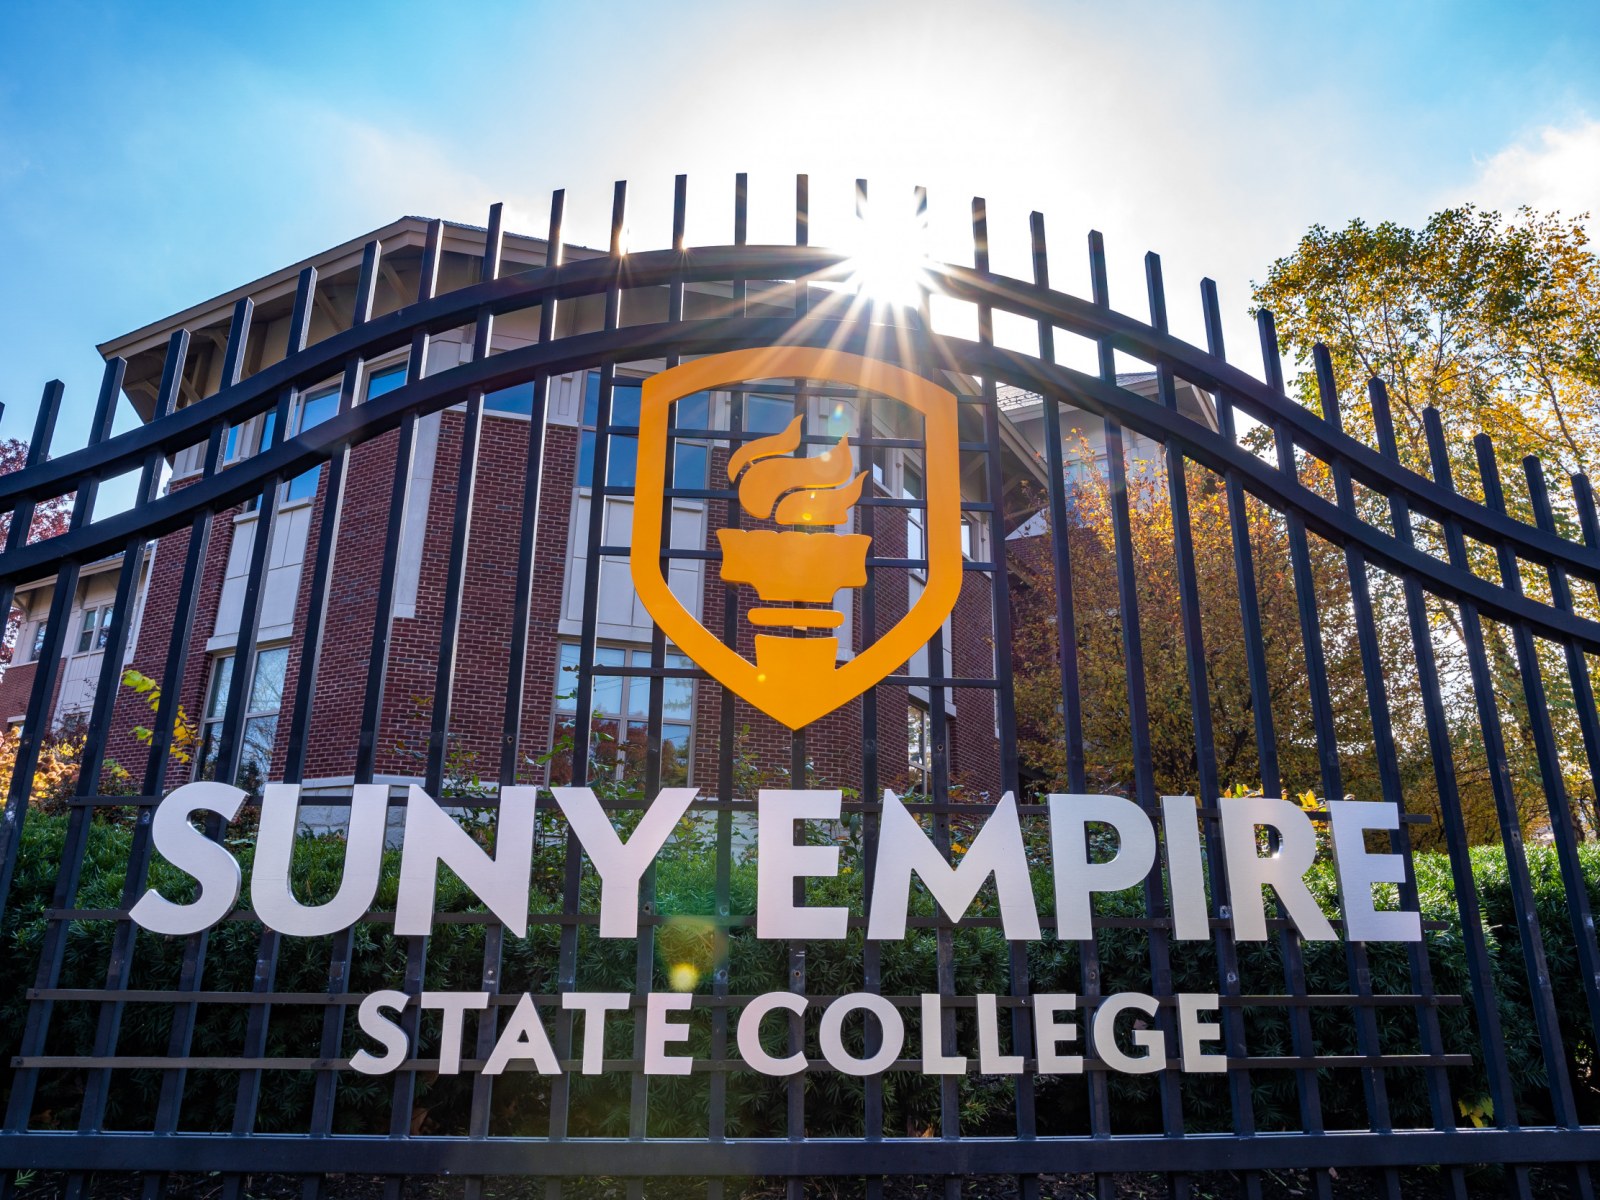 HETS welcomes SUNY Empire State College as its new member institution